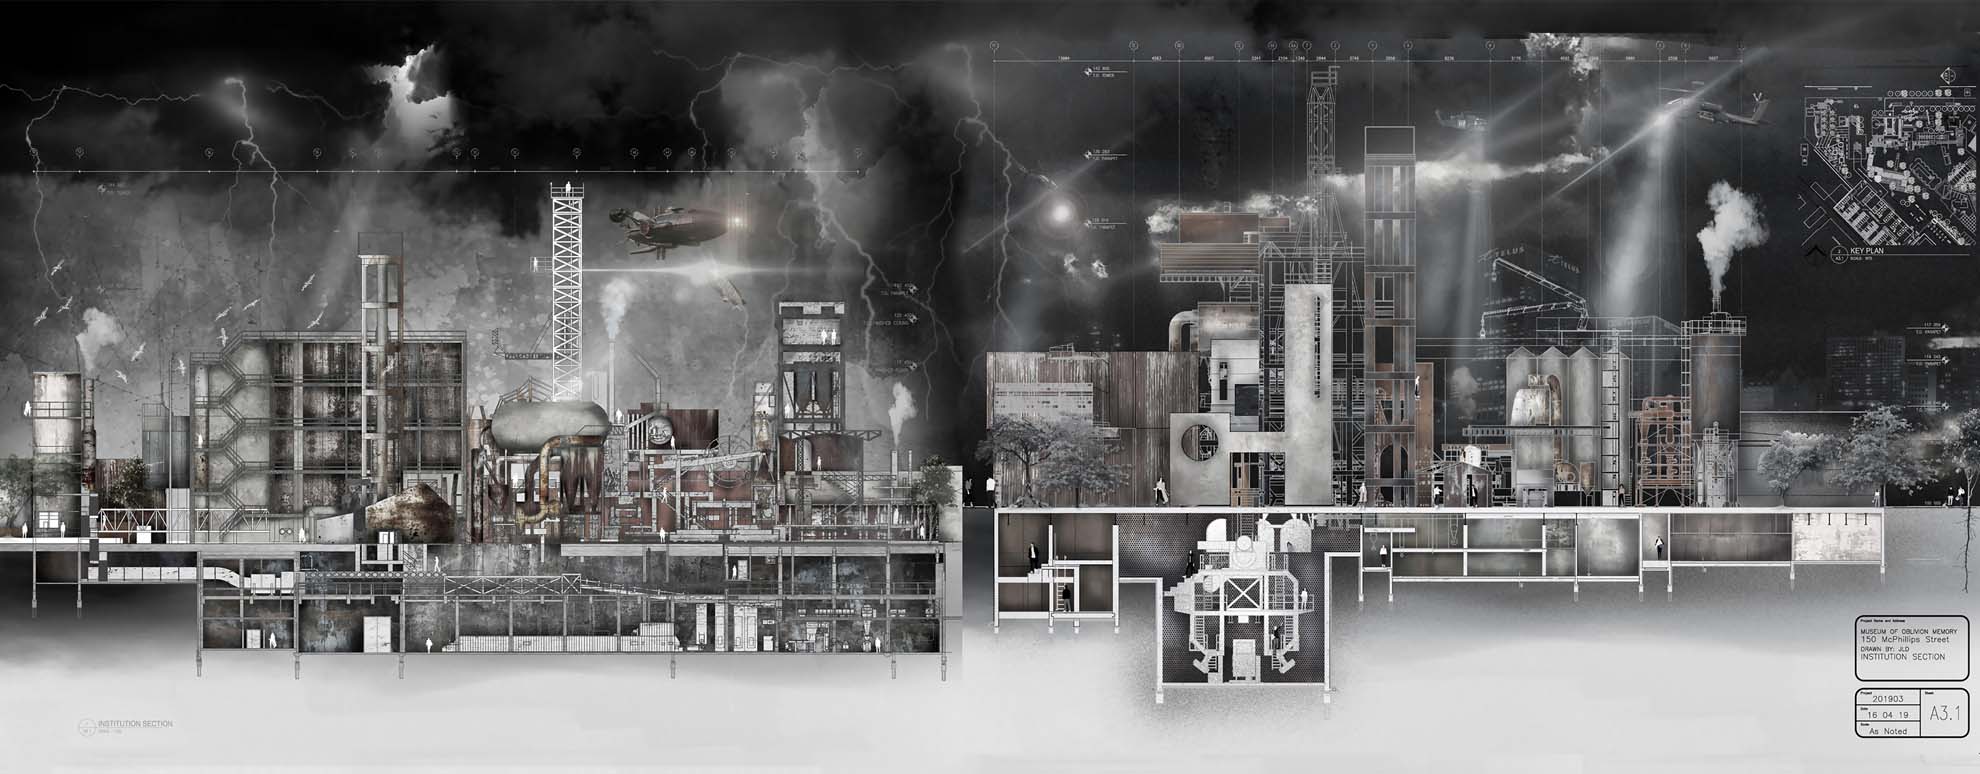 Winner of The Architecture Drawing Prize 2019 | Livegreenblog